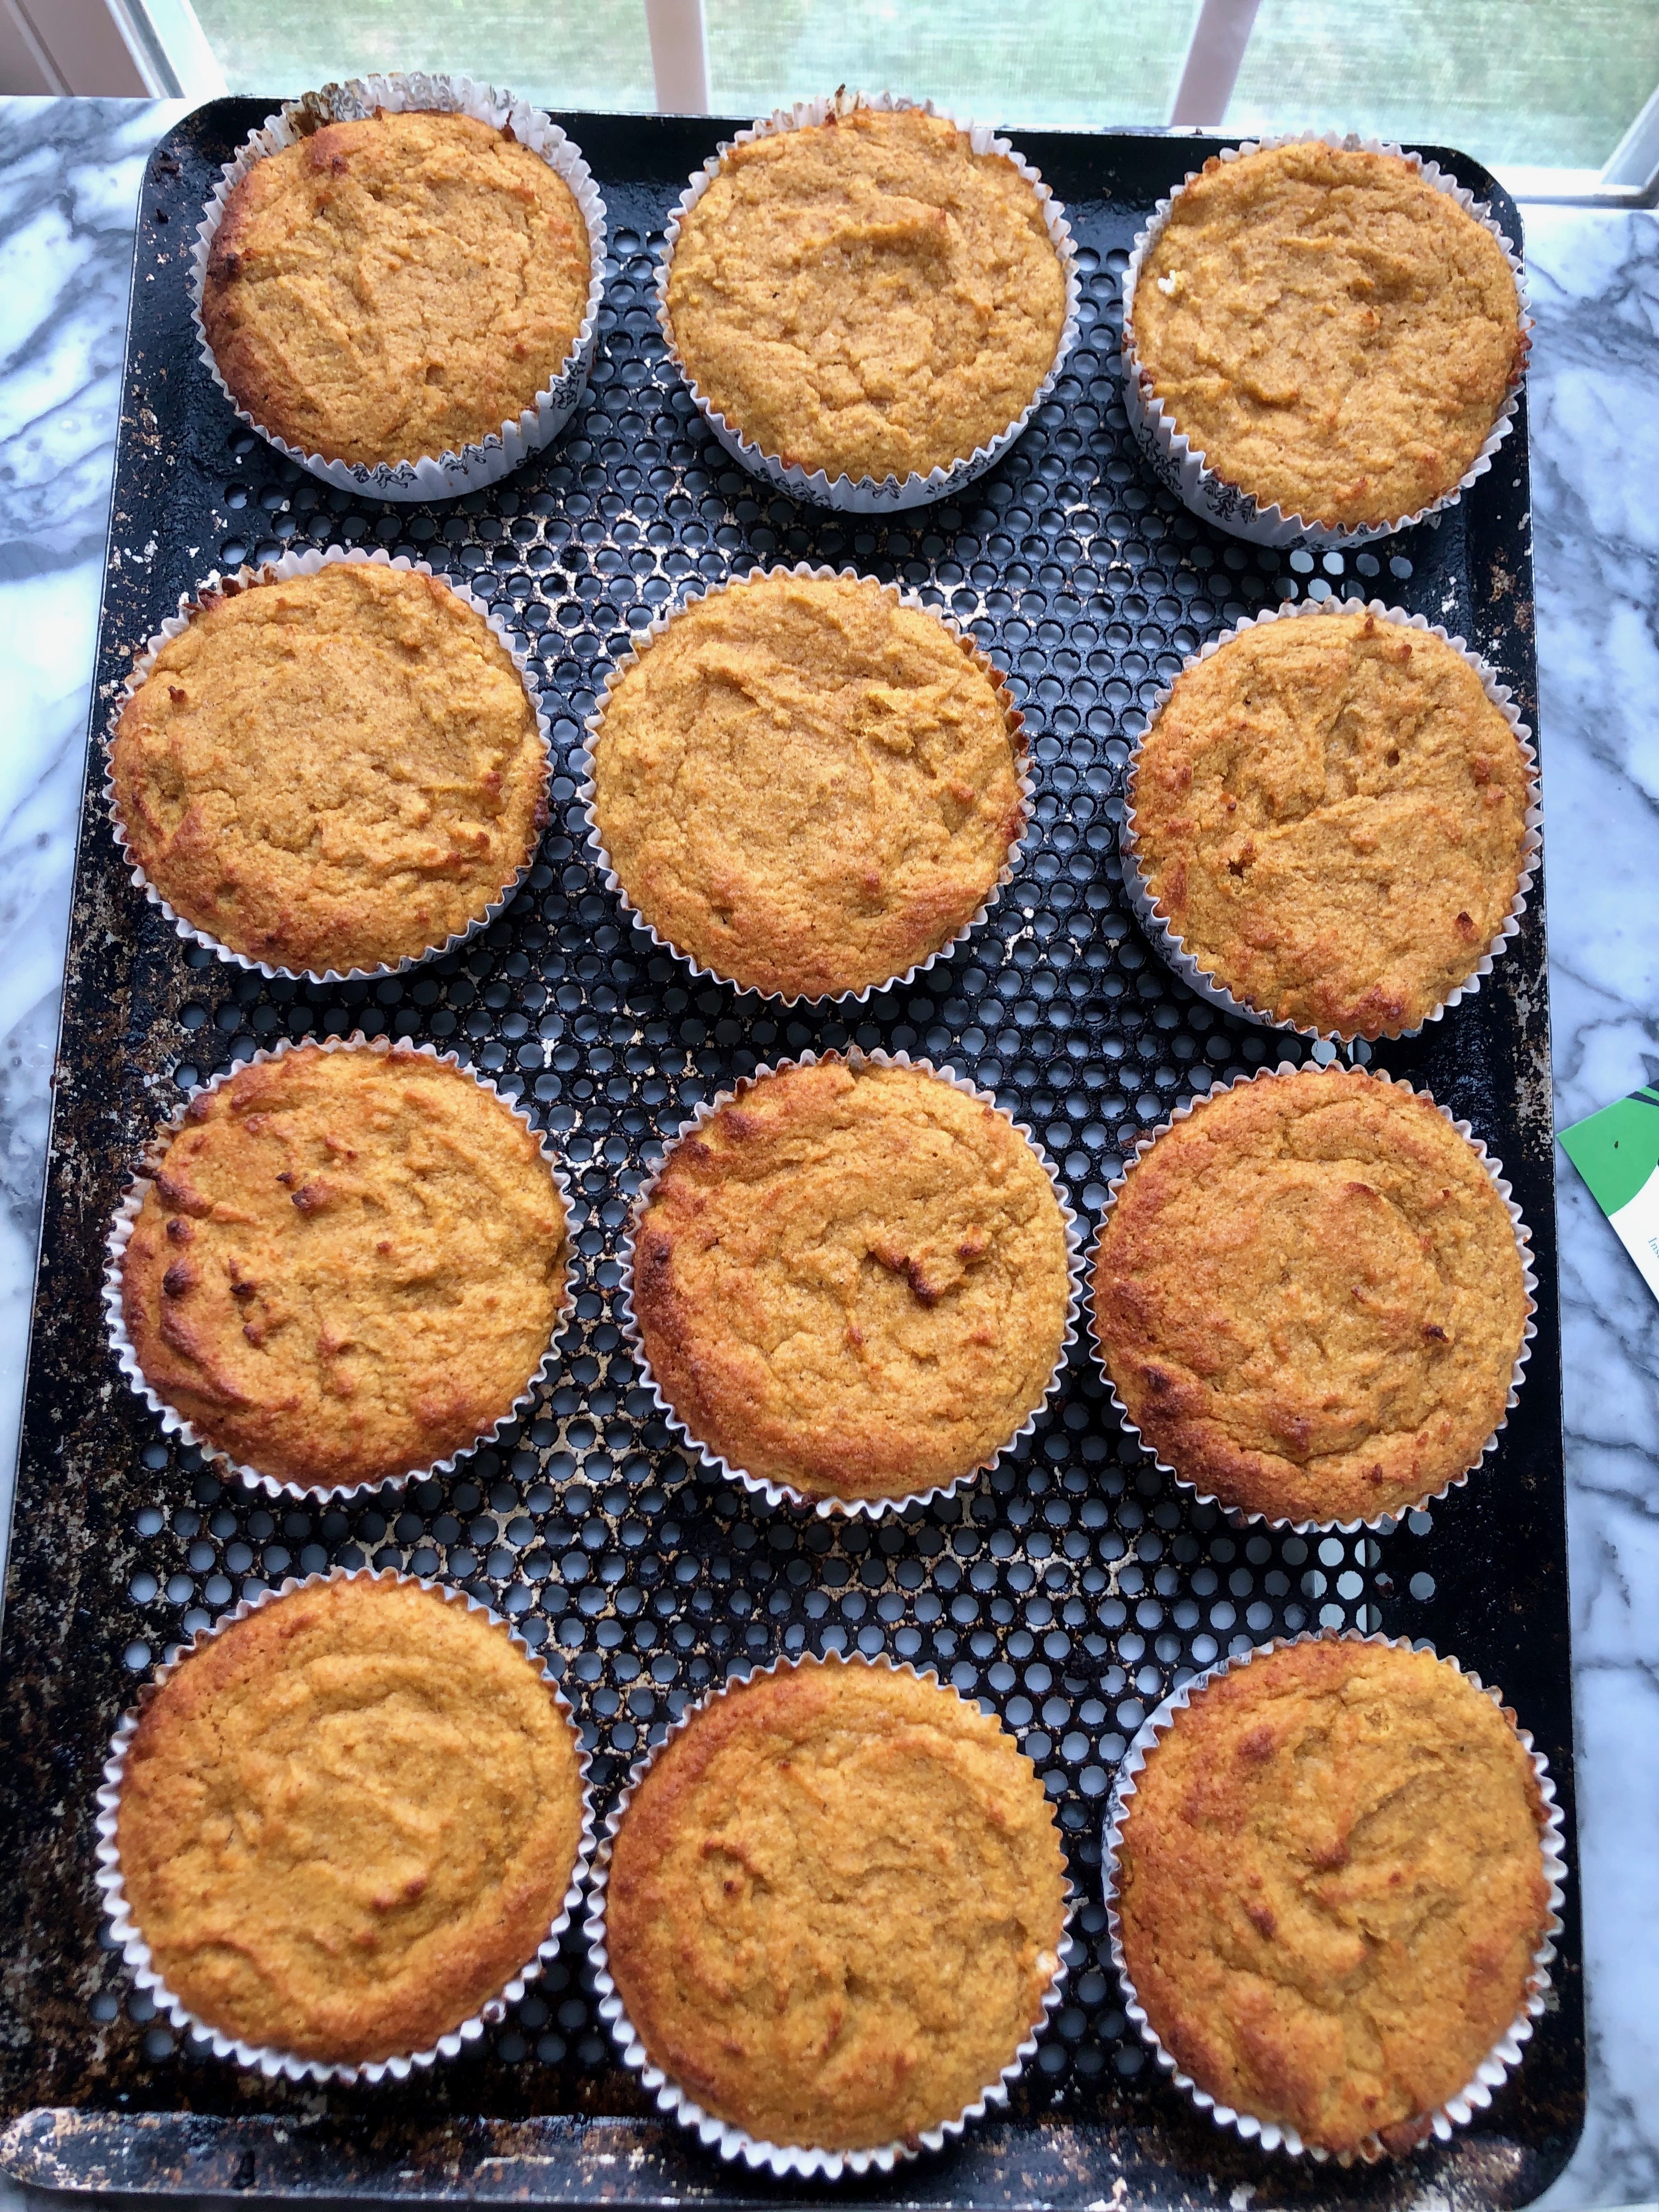 Keto Pumpkin Cupcakes from Spinach Tiger